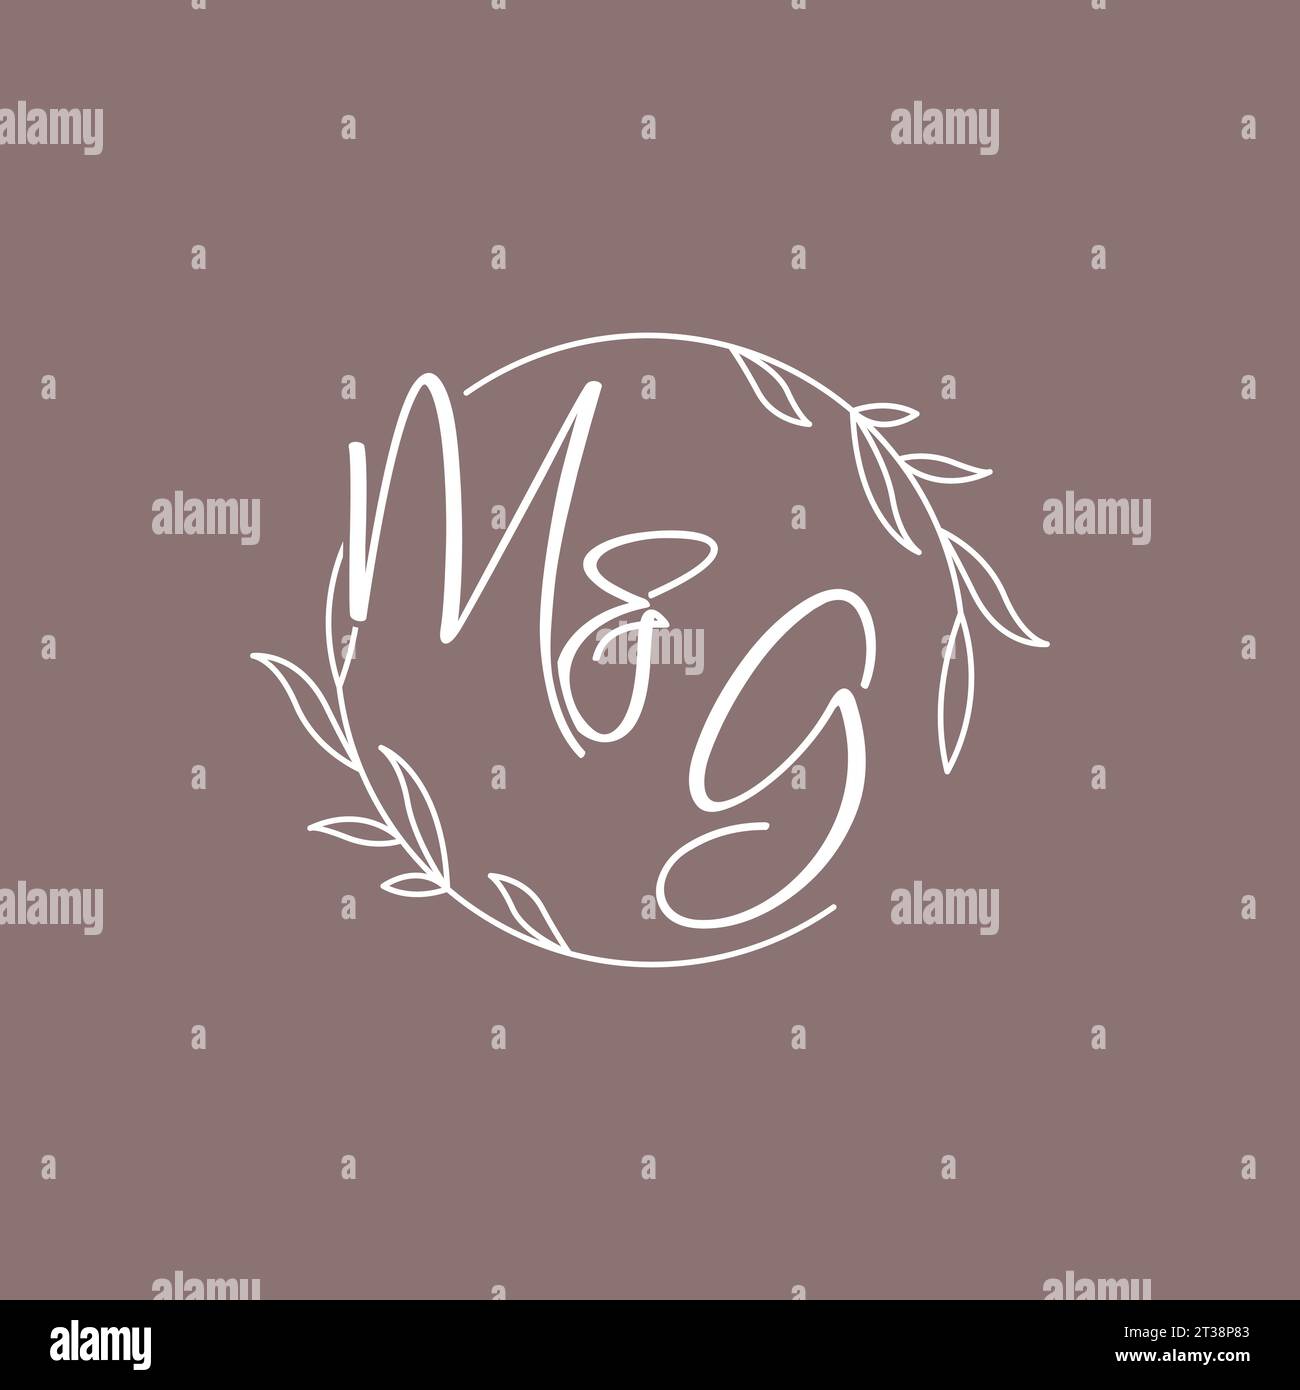 2 Letter Monogram With Letters MG Digital Download Wedding 